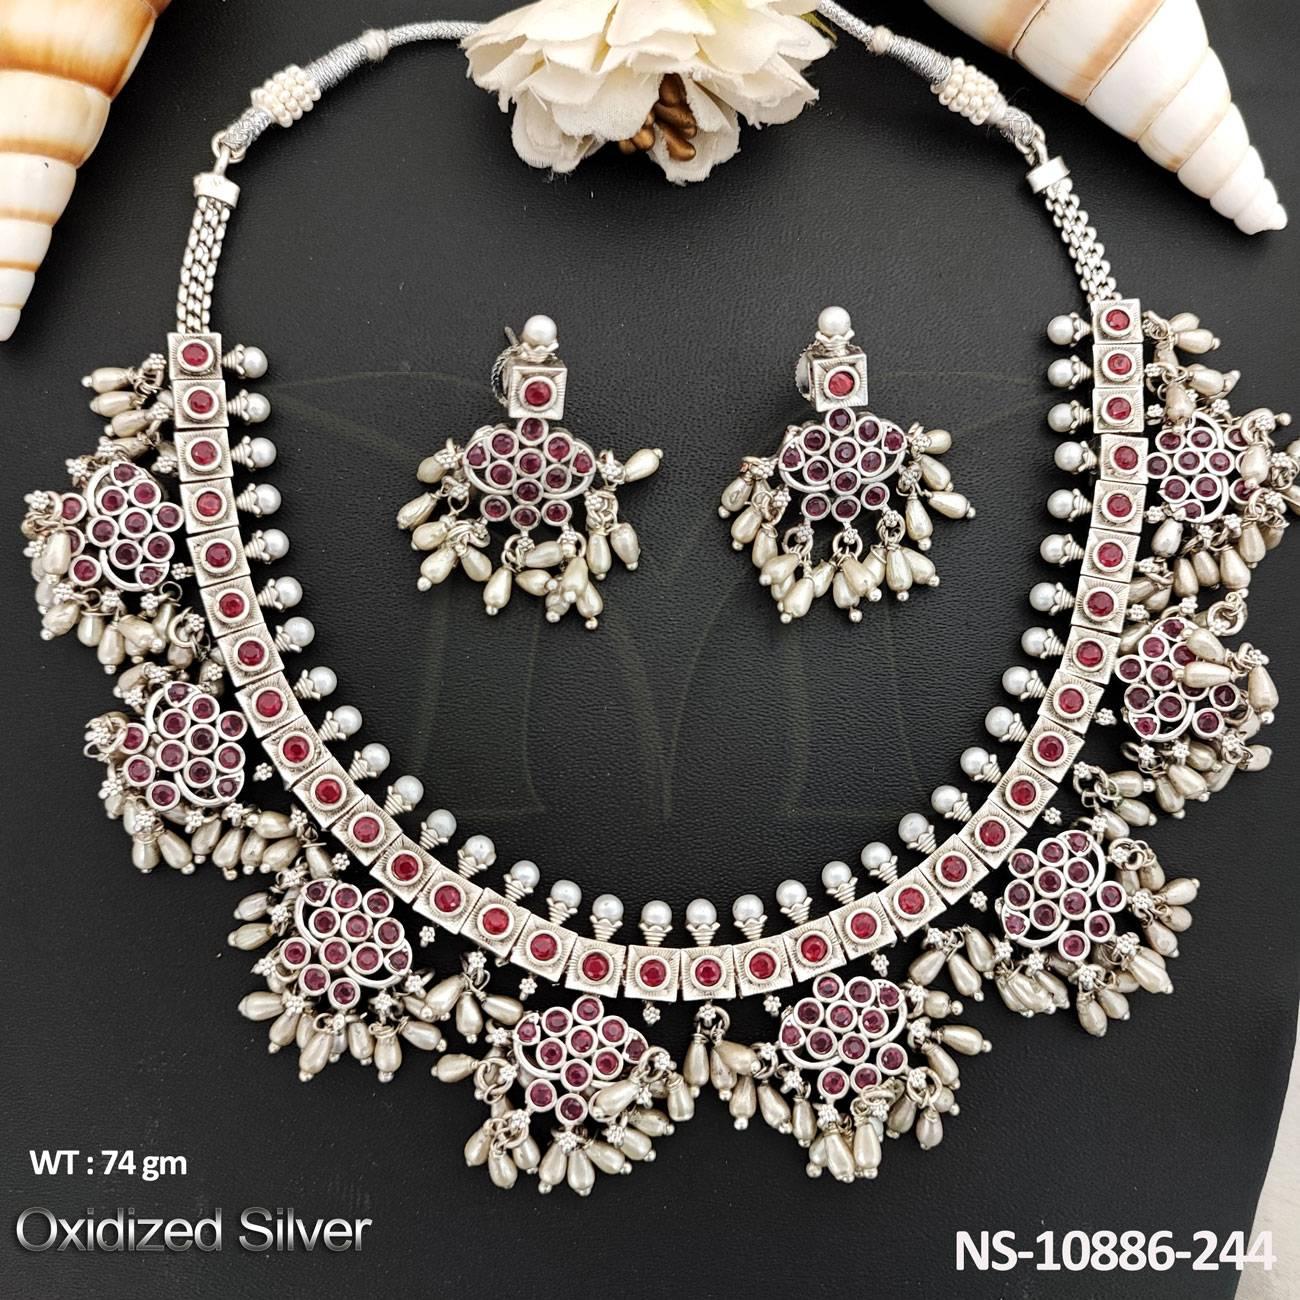 This exquisite short necklace set is perfect for the Navratra festival. Made with oxidized silver polish and featuring a fancy design, it adds a touch of elegance to any outfit.